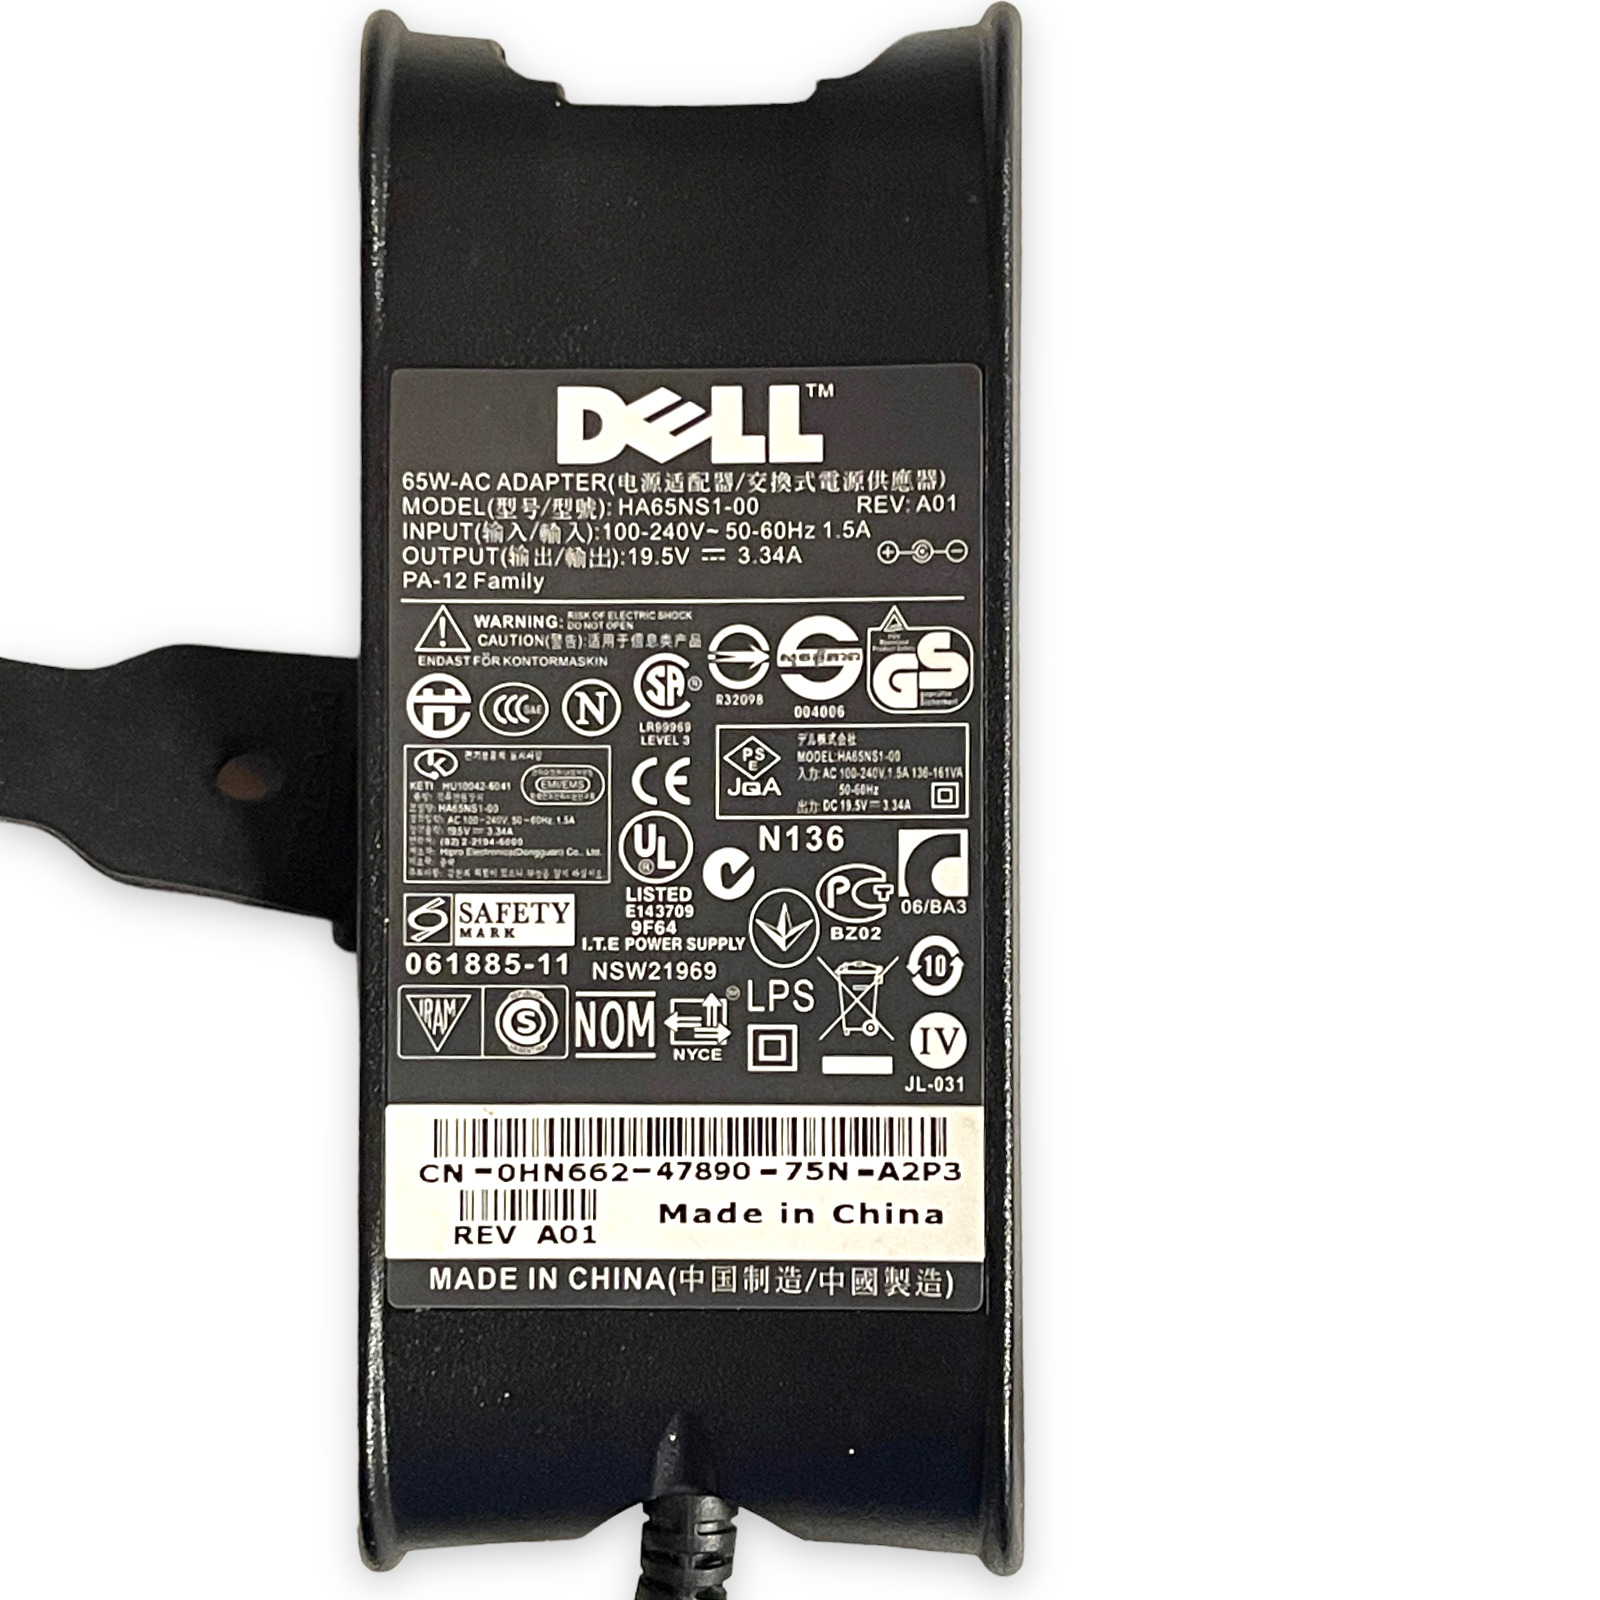 Dell HA65NS1-00 Genuine Laptop Charger OEM AC Adapter Black